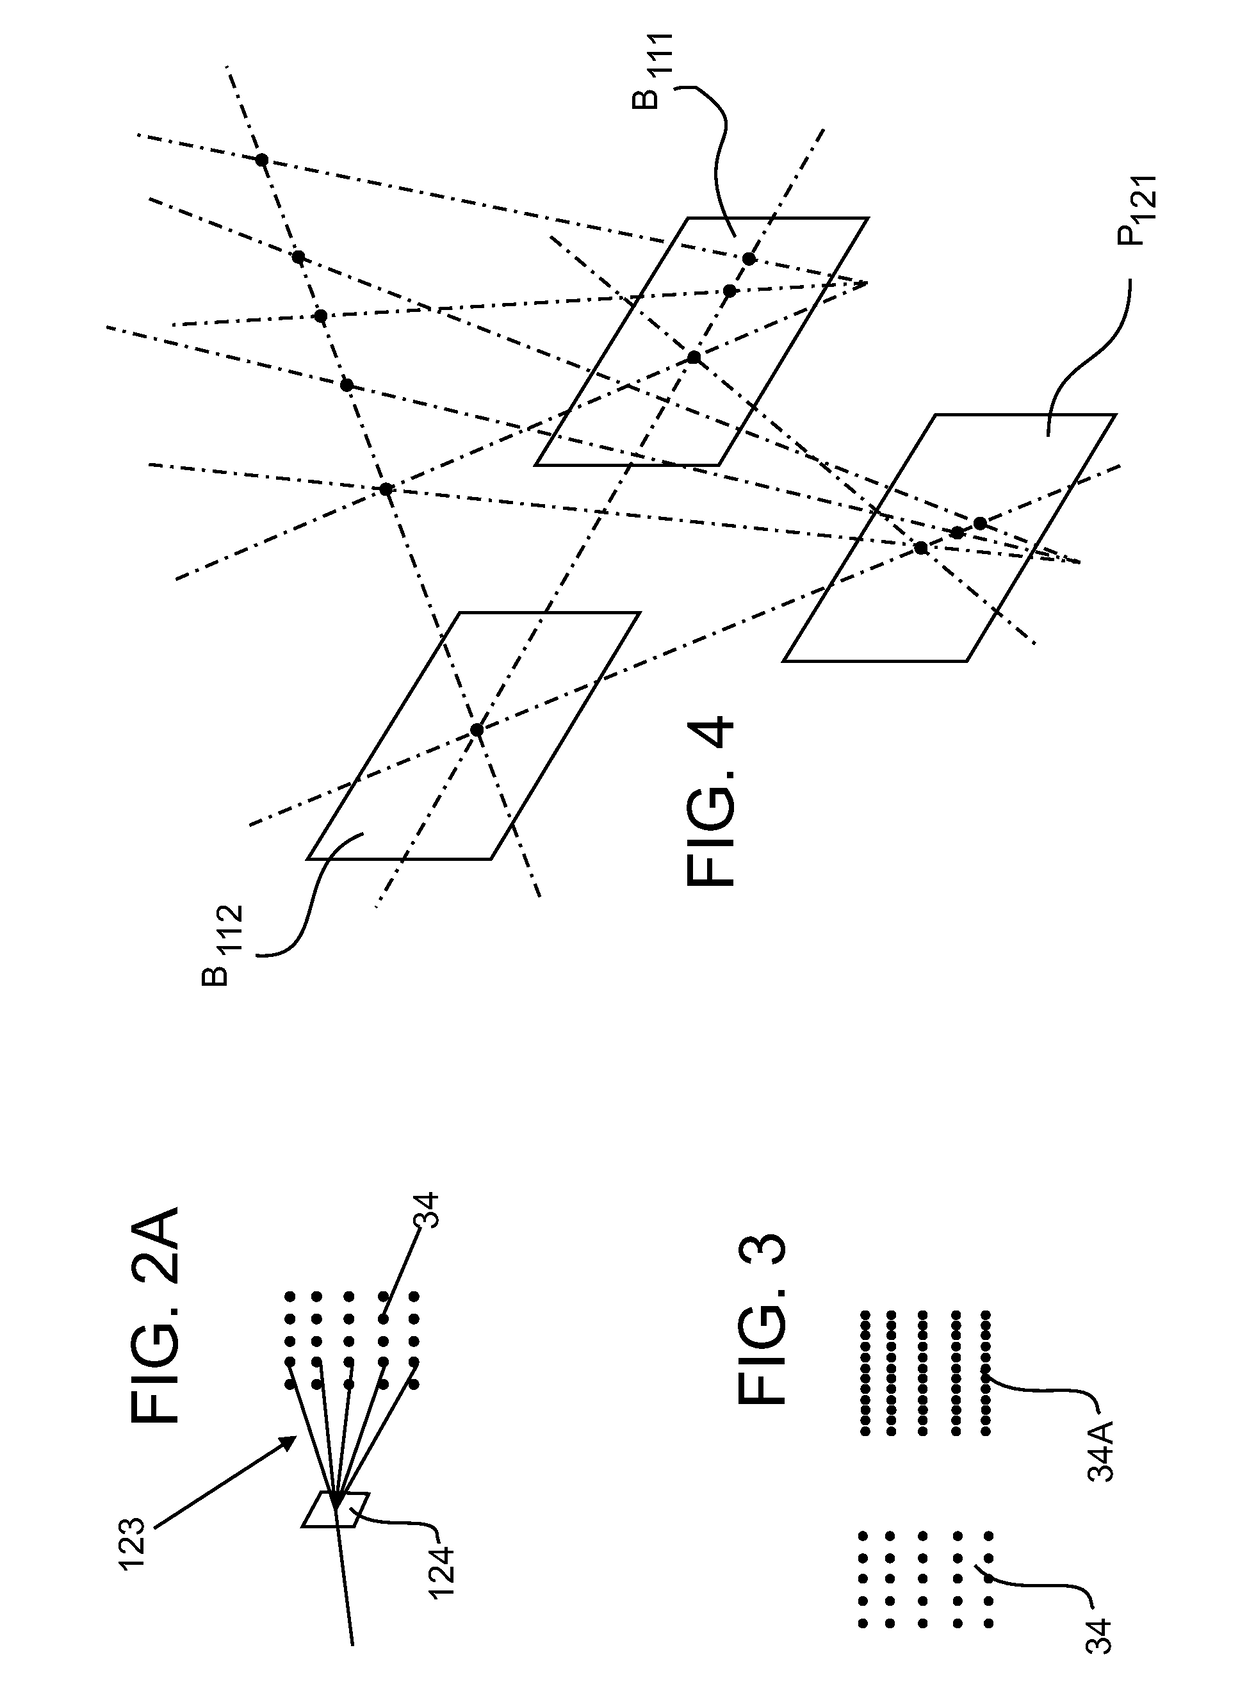 System and method of acquiring three-dimensional coordinates using multiple coordinate measurement devices